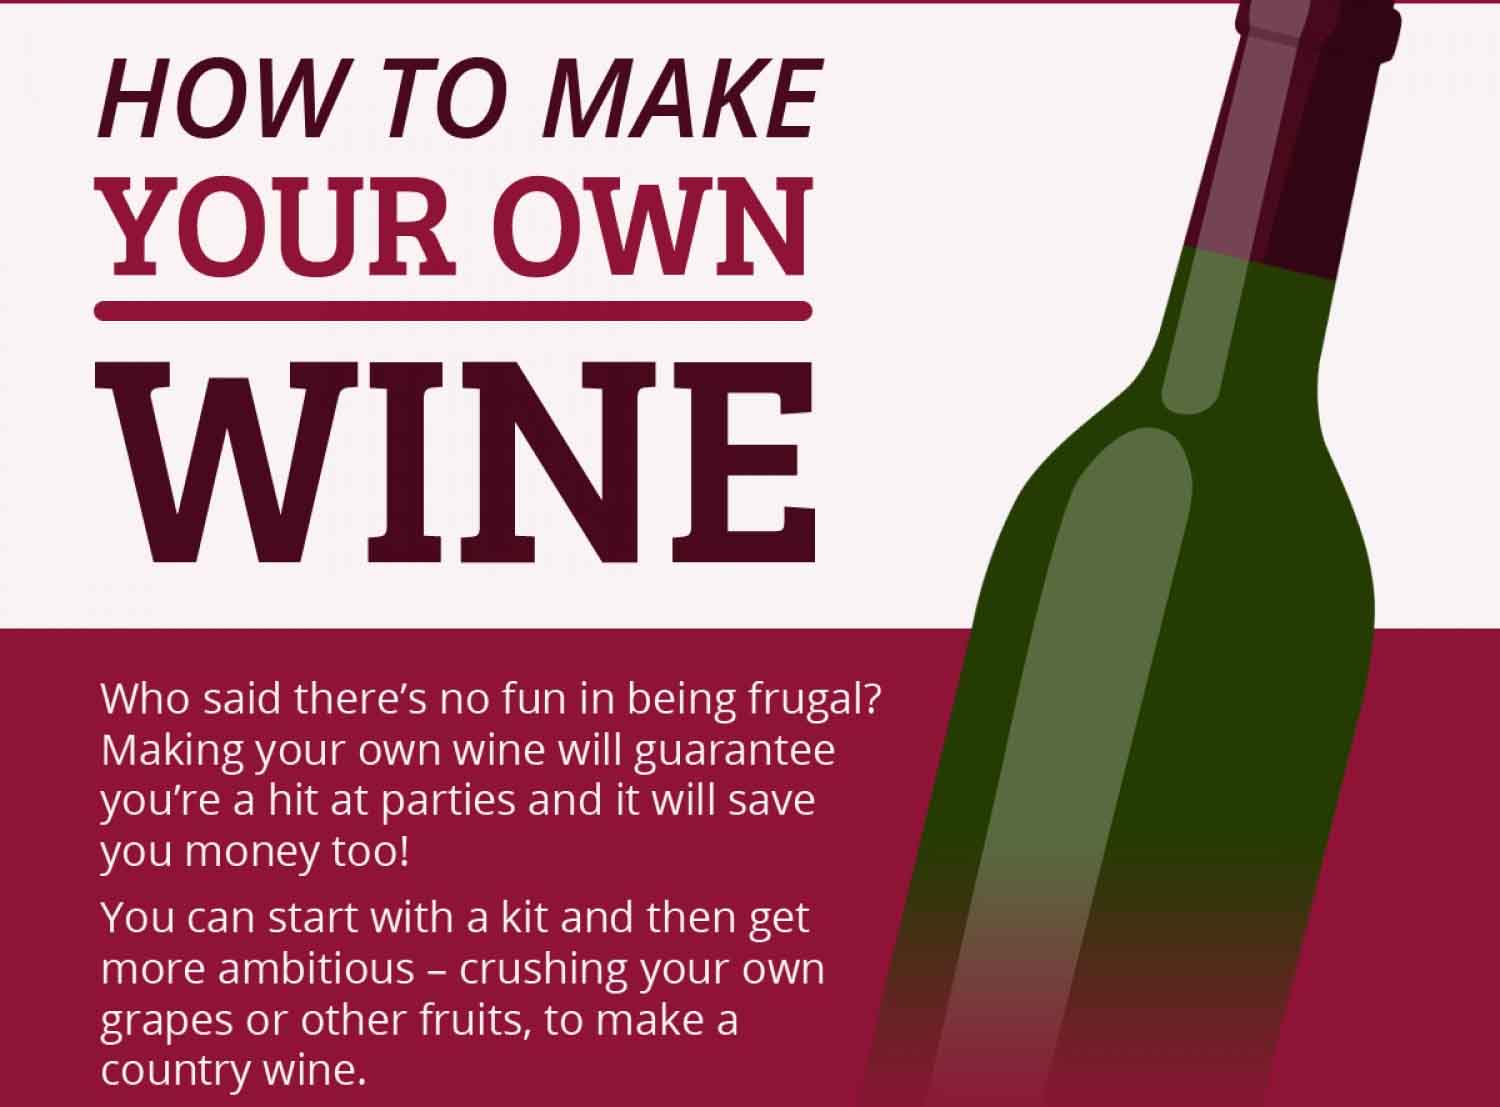 Making your own wine 